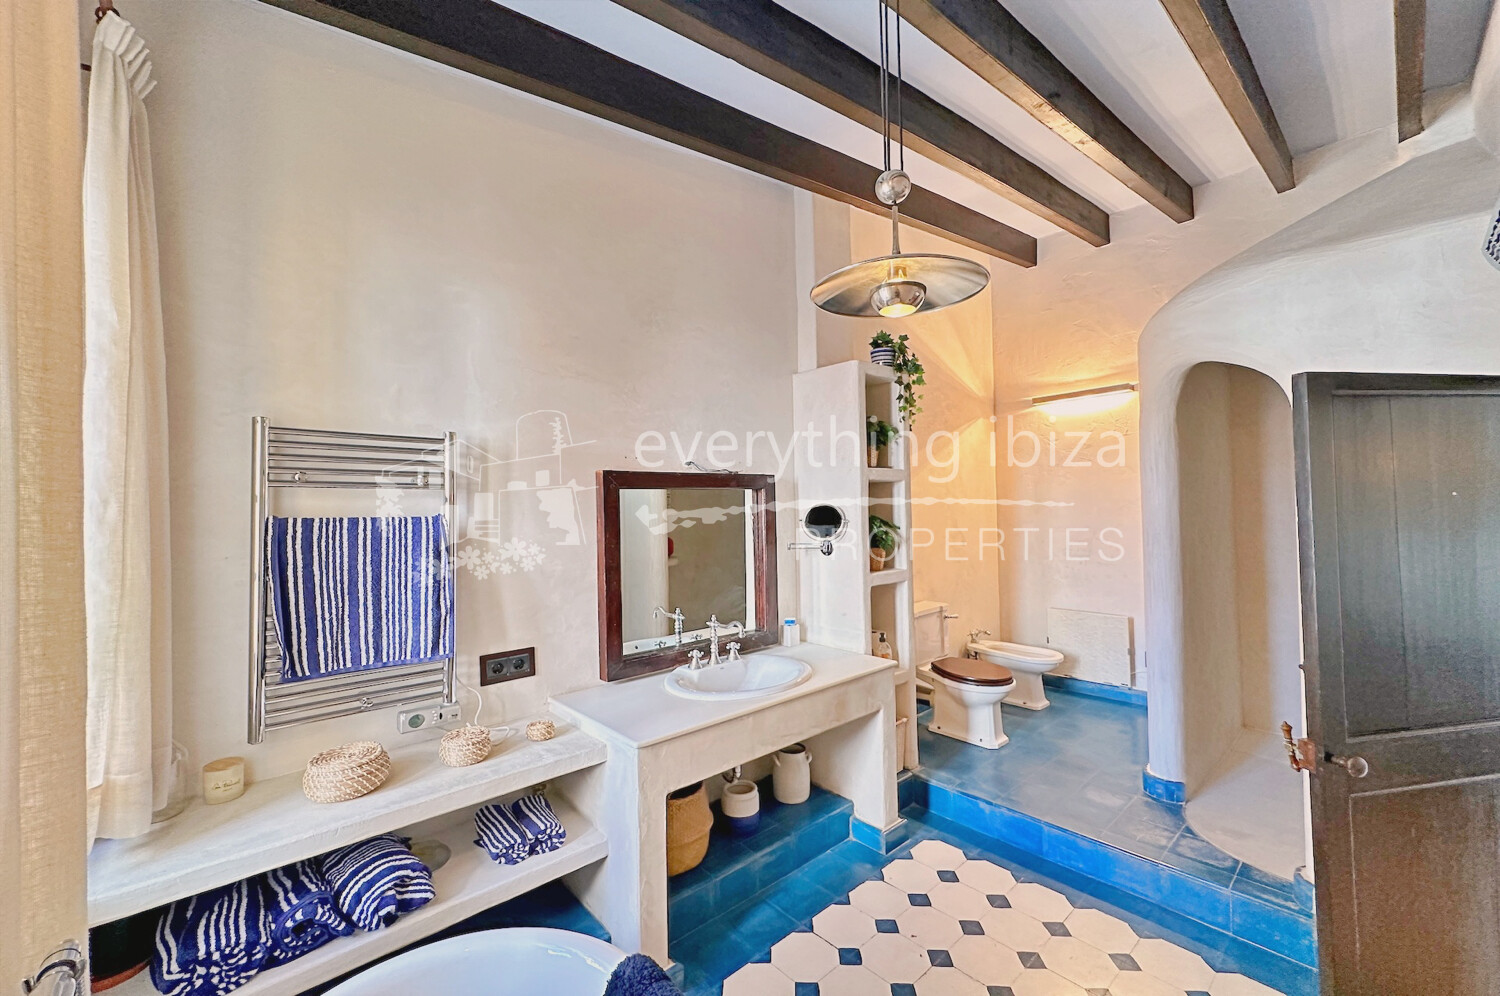 Lovely Modernised Four Bedroom Townhouse Ibiza Old Town, ref. 1645, for sale in Ibiza by everything ibiza Properties